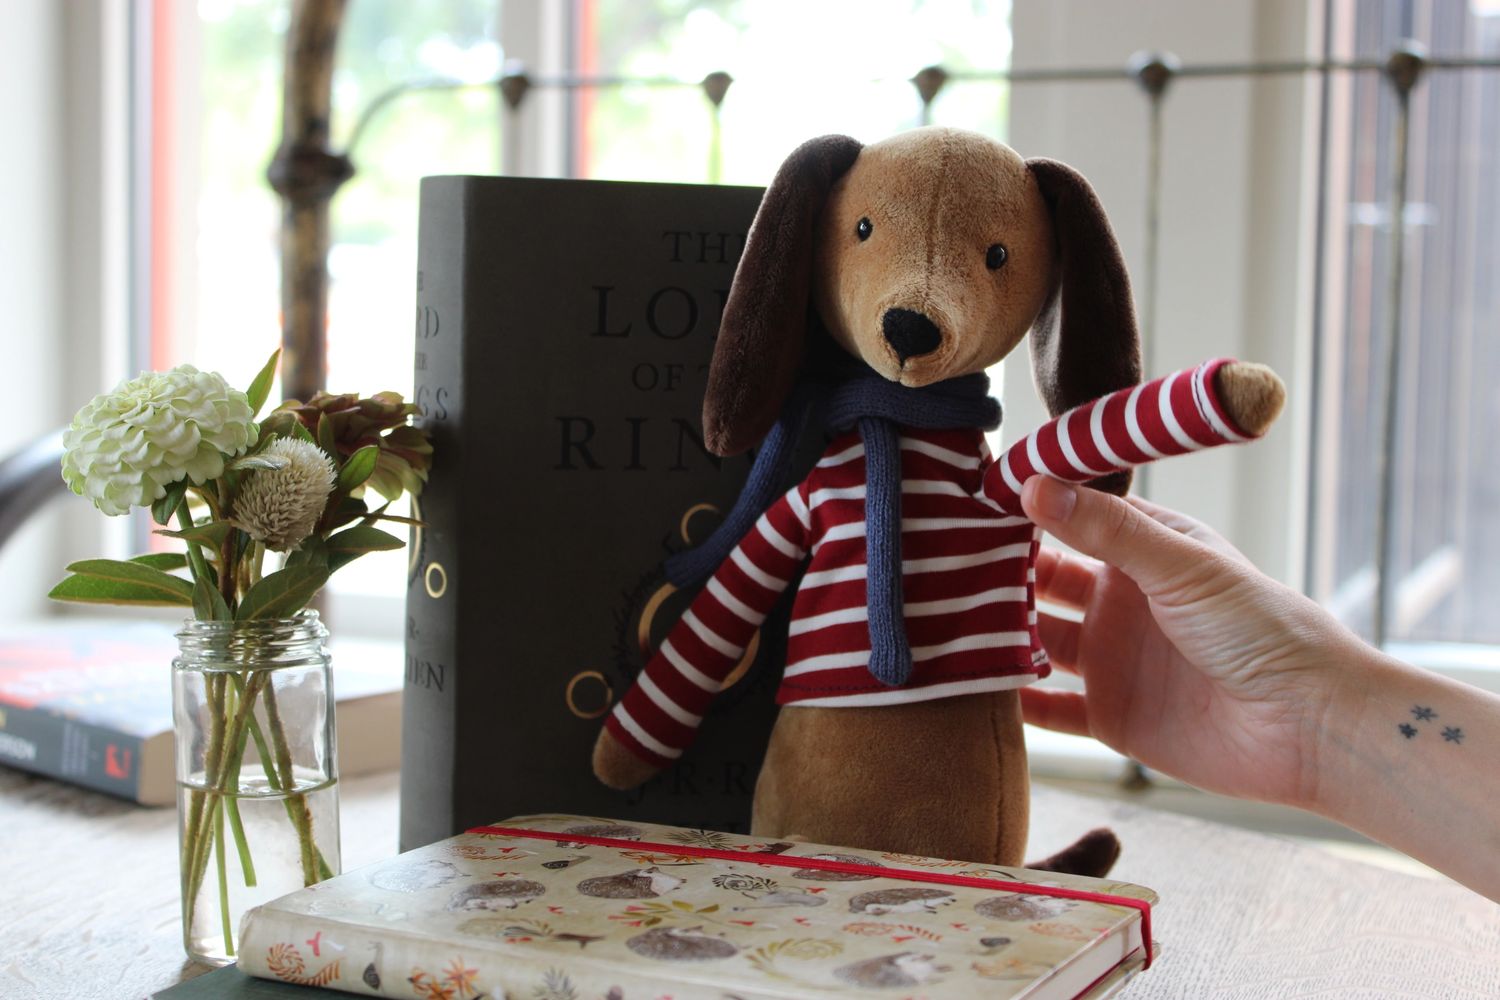 Toy dog waving in front of stack of notebooks, a small flower vase, and a grey book in the back.